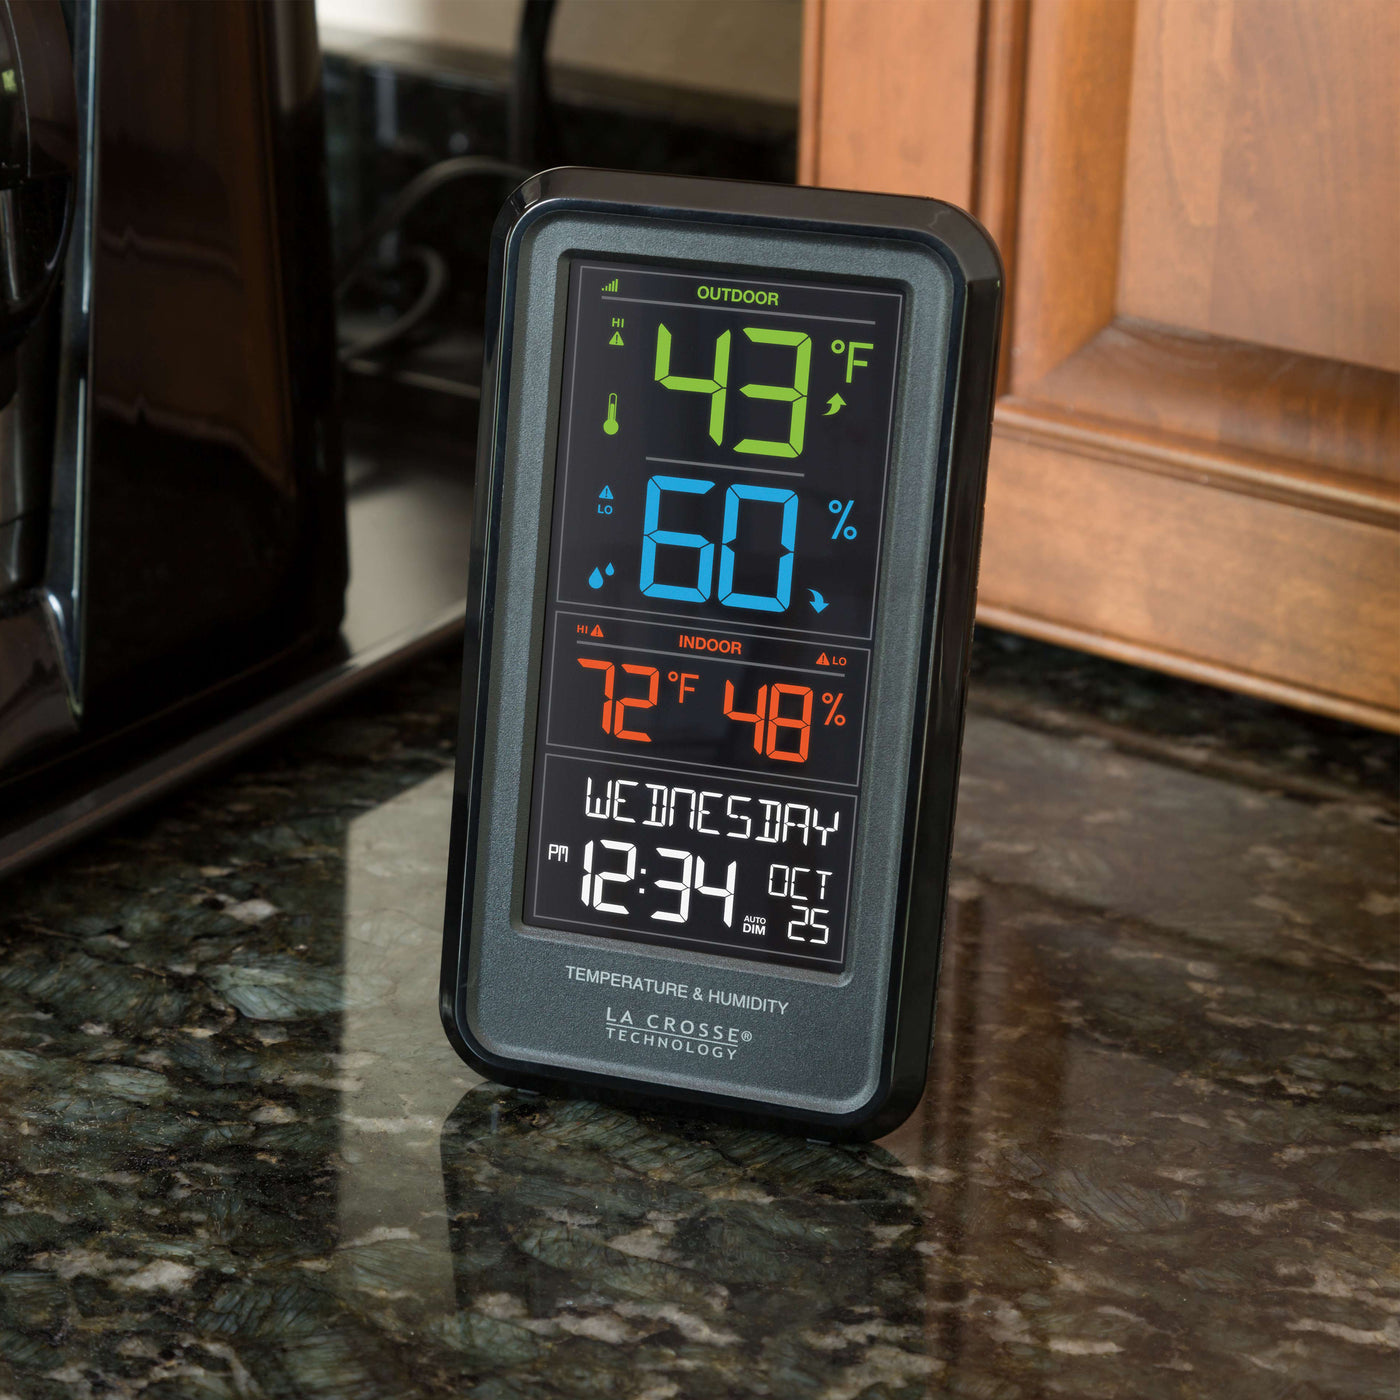 S82967 Personal Weather Station